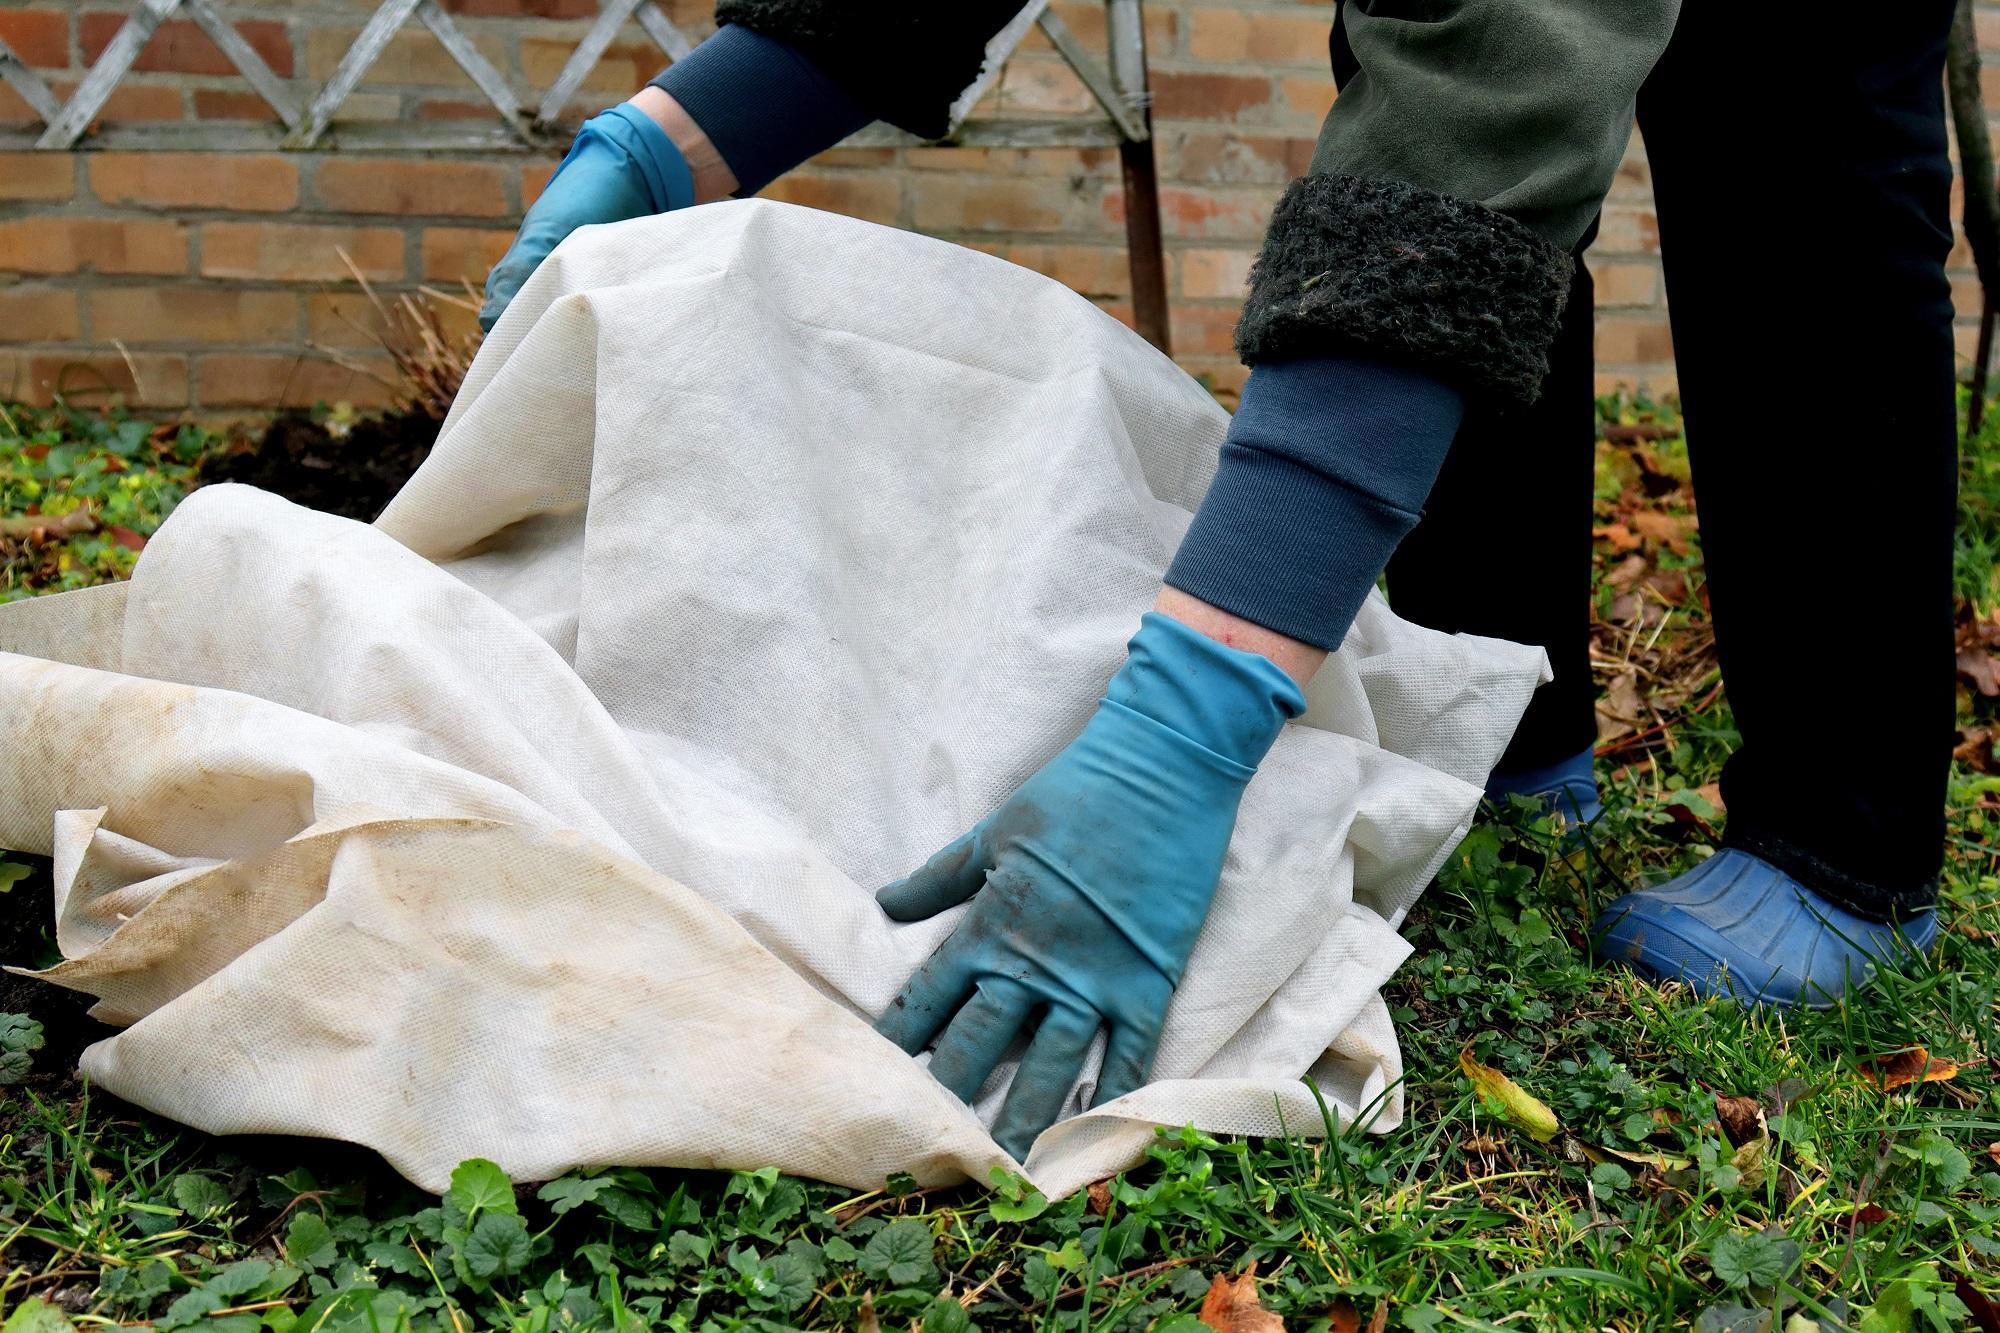 A gardener covering rose bushes with fabric to protect them from the winter temperatures.